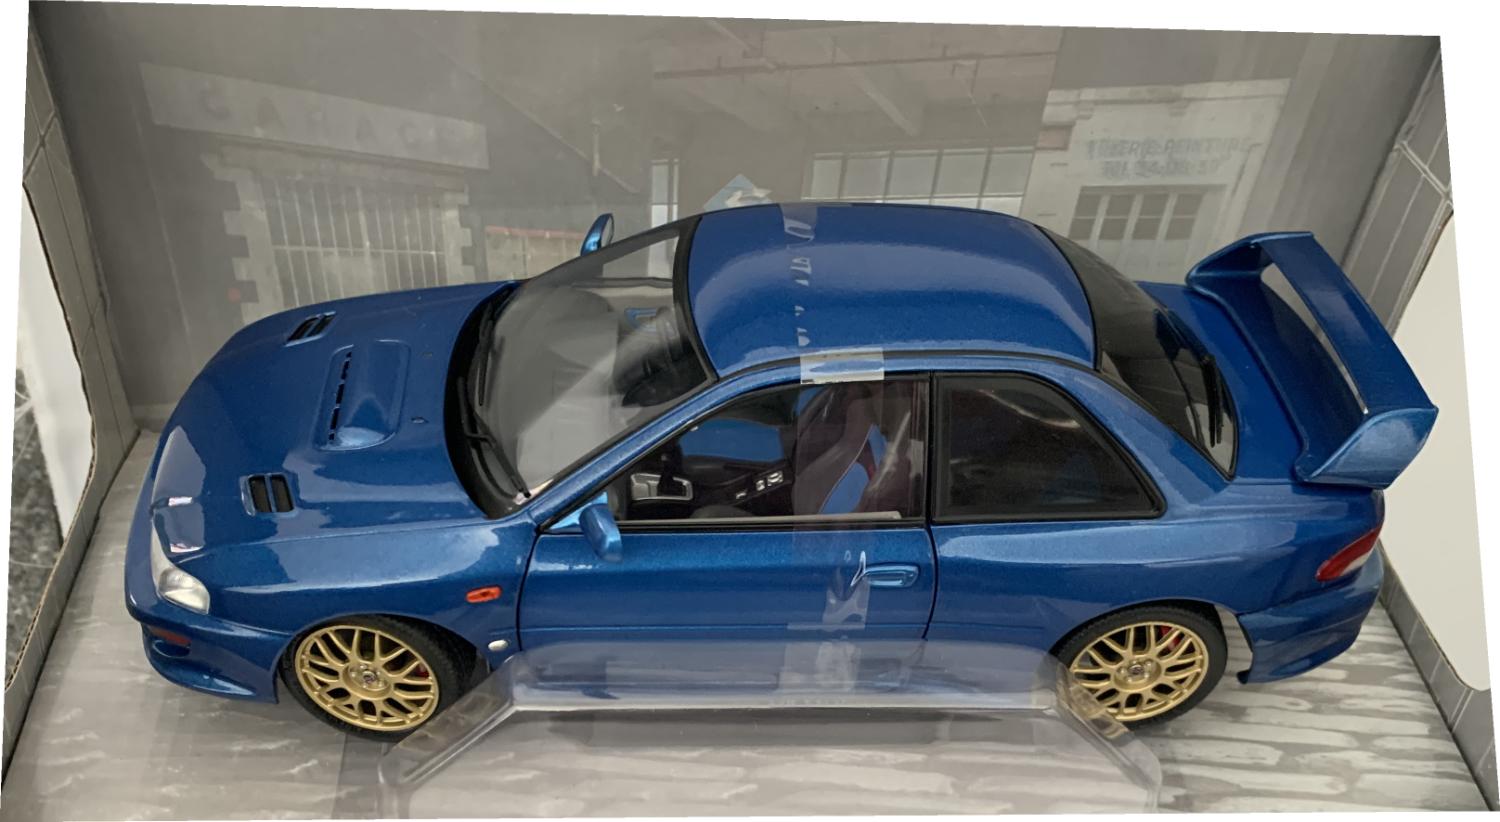 A very good representation of the Subaru Impreza 22B STi Version decorated in sonic blue with high rear spoiler, bonnet air vents, blacked out rear windows and gold wheels